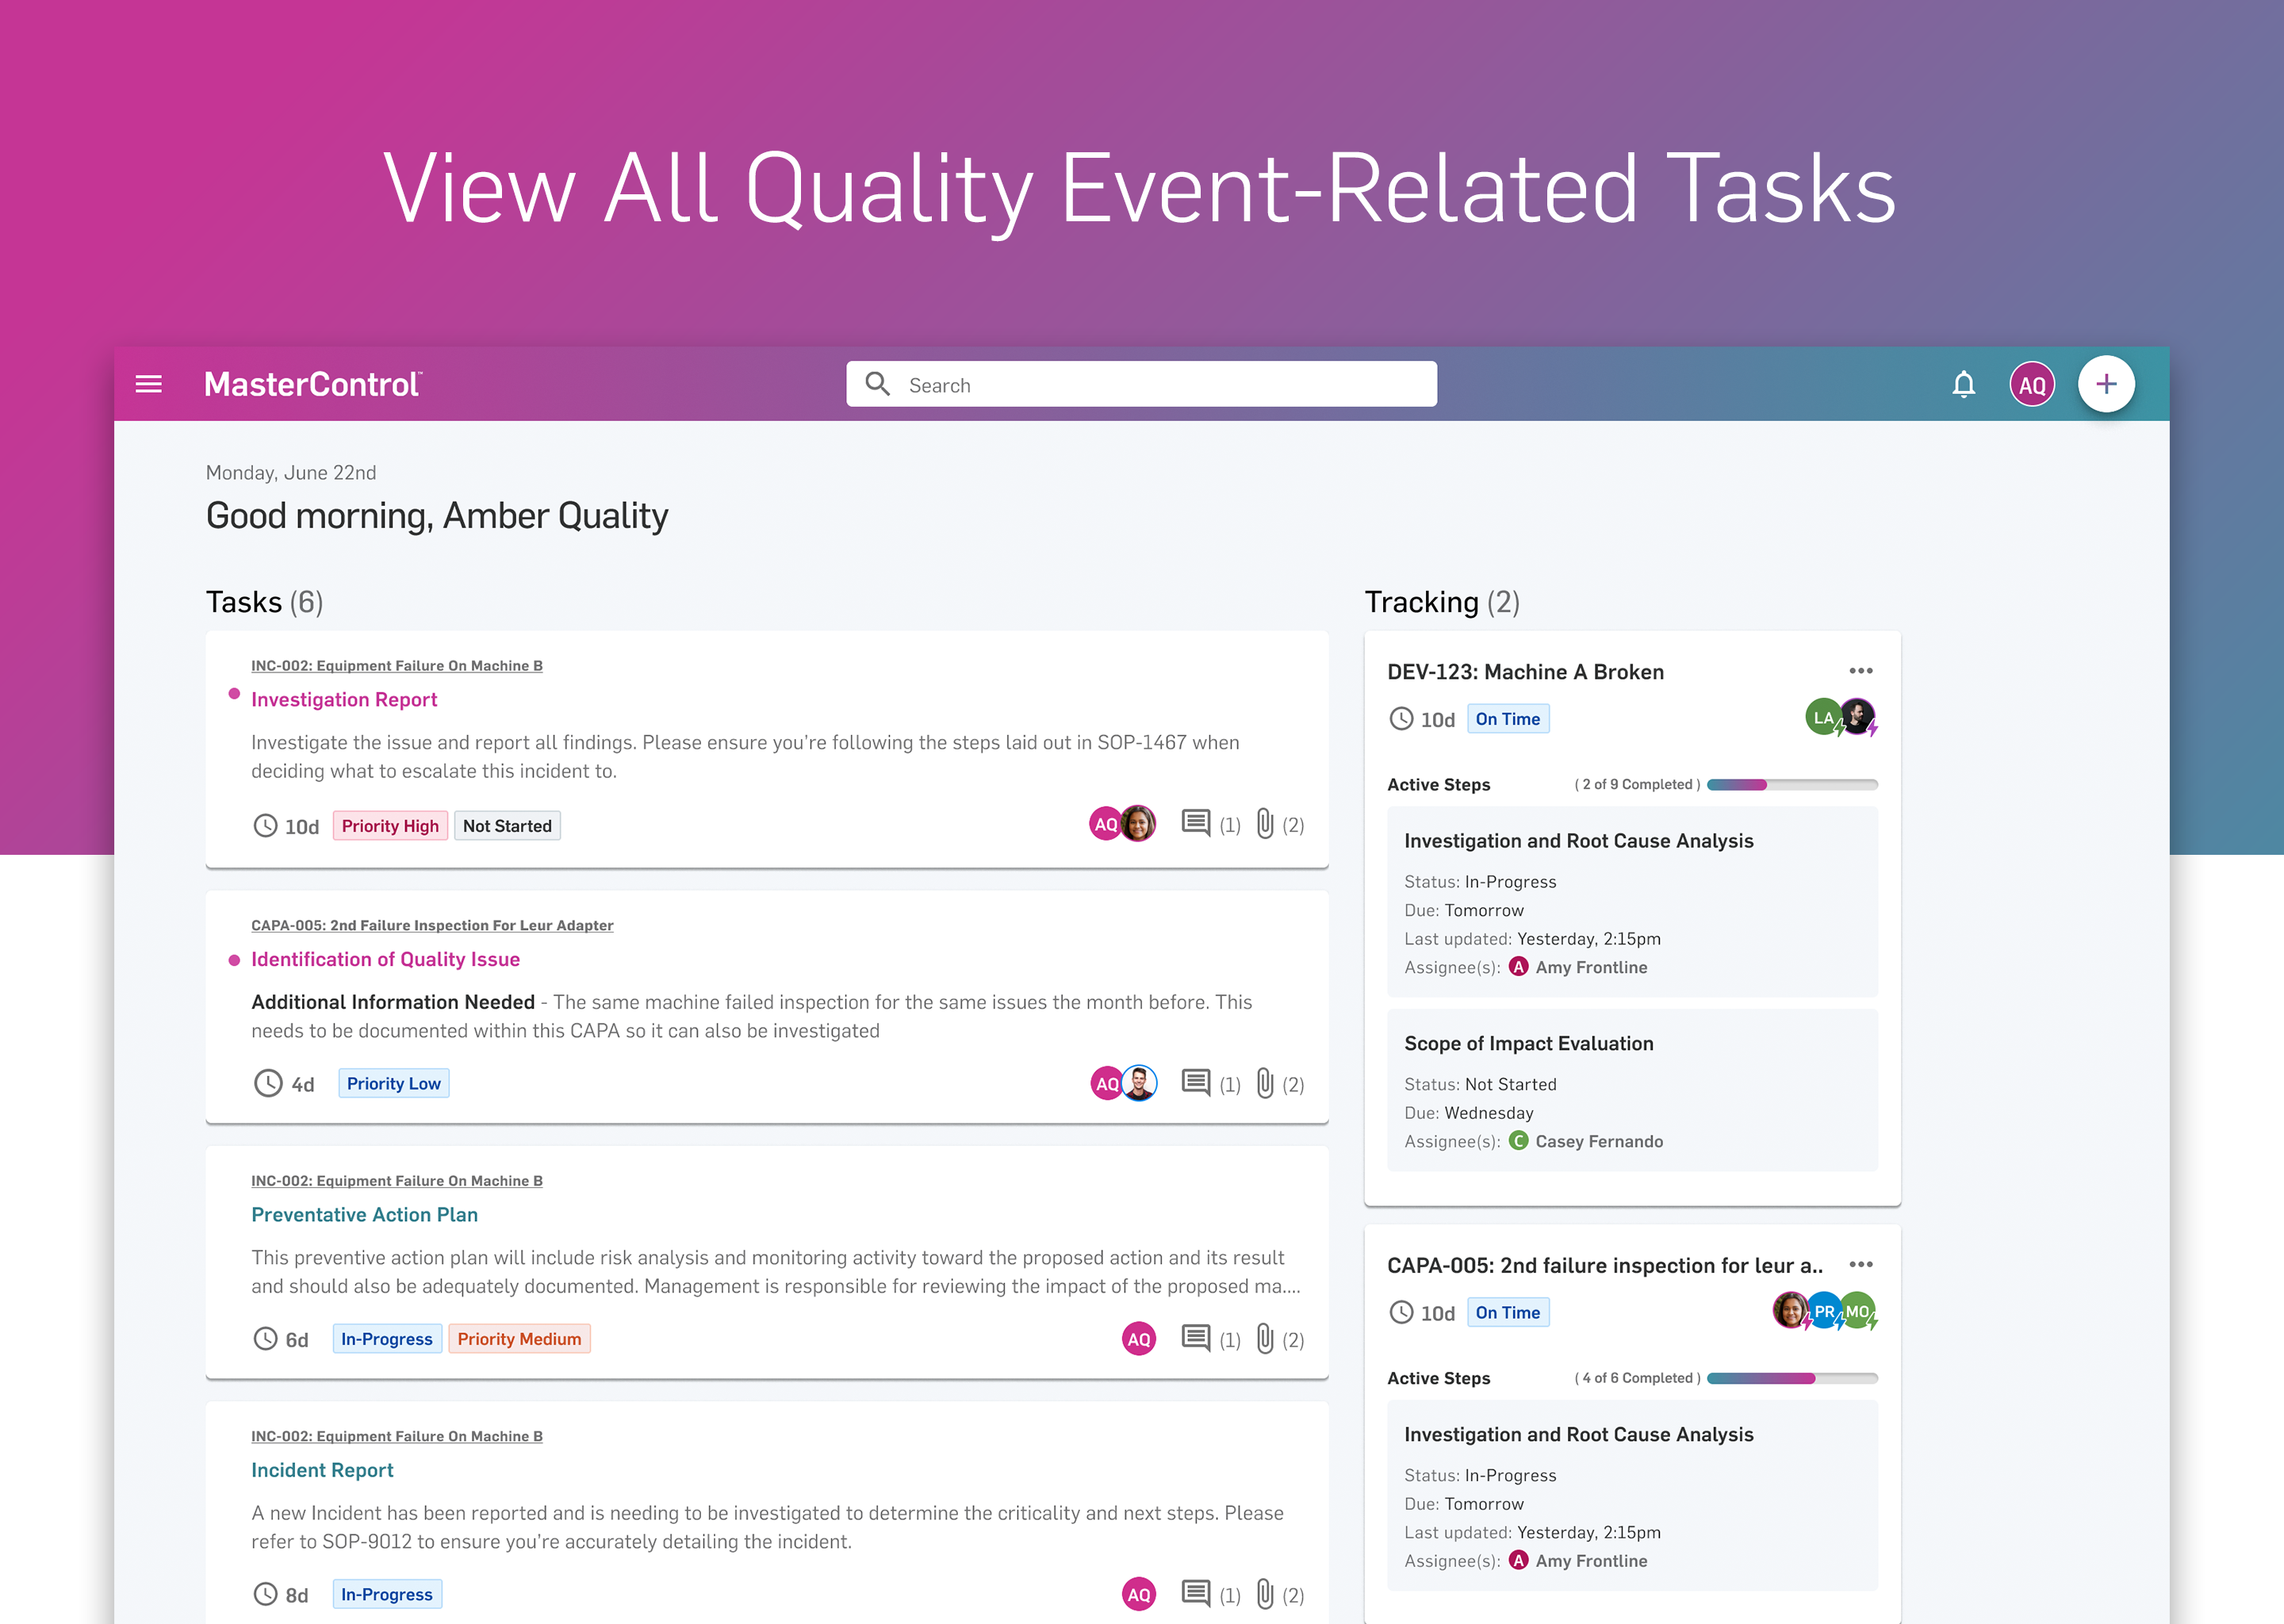 MasterControl Quality Excellence Software - Quality Event Related Tasks